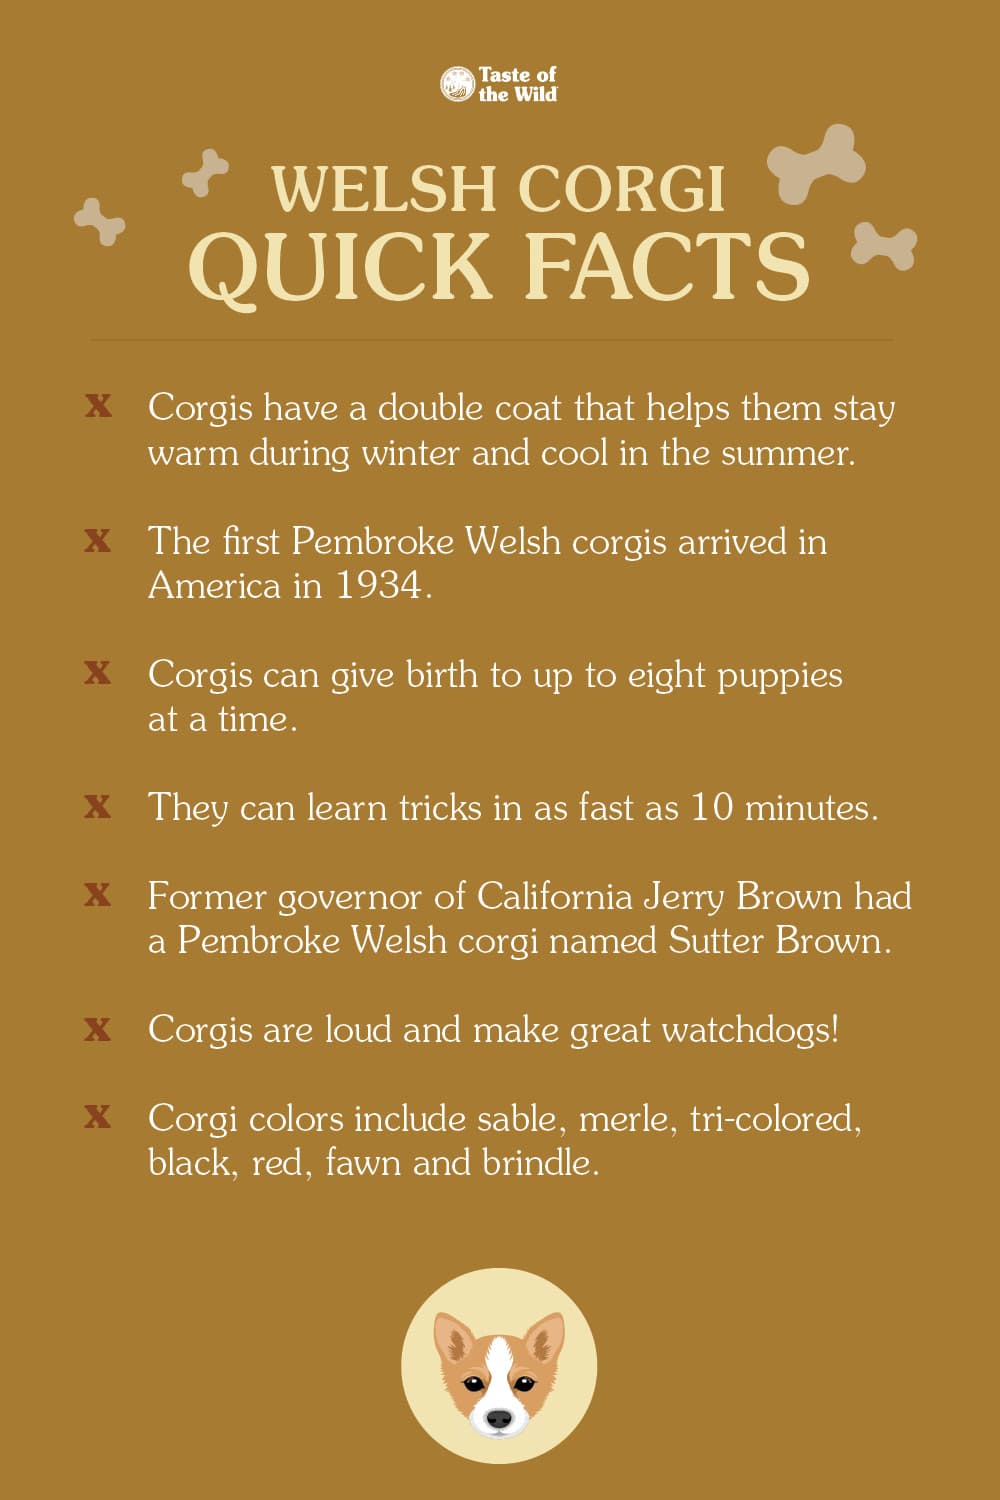 Welsh Corgi Quick Facts Infographic | Taste of the Wild